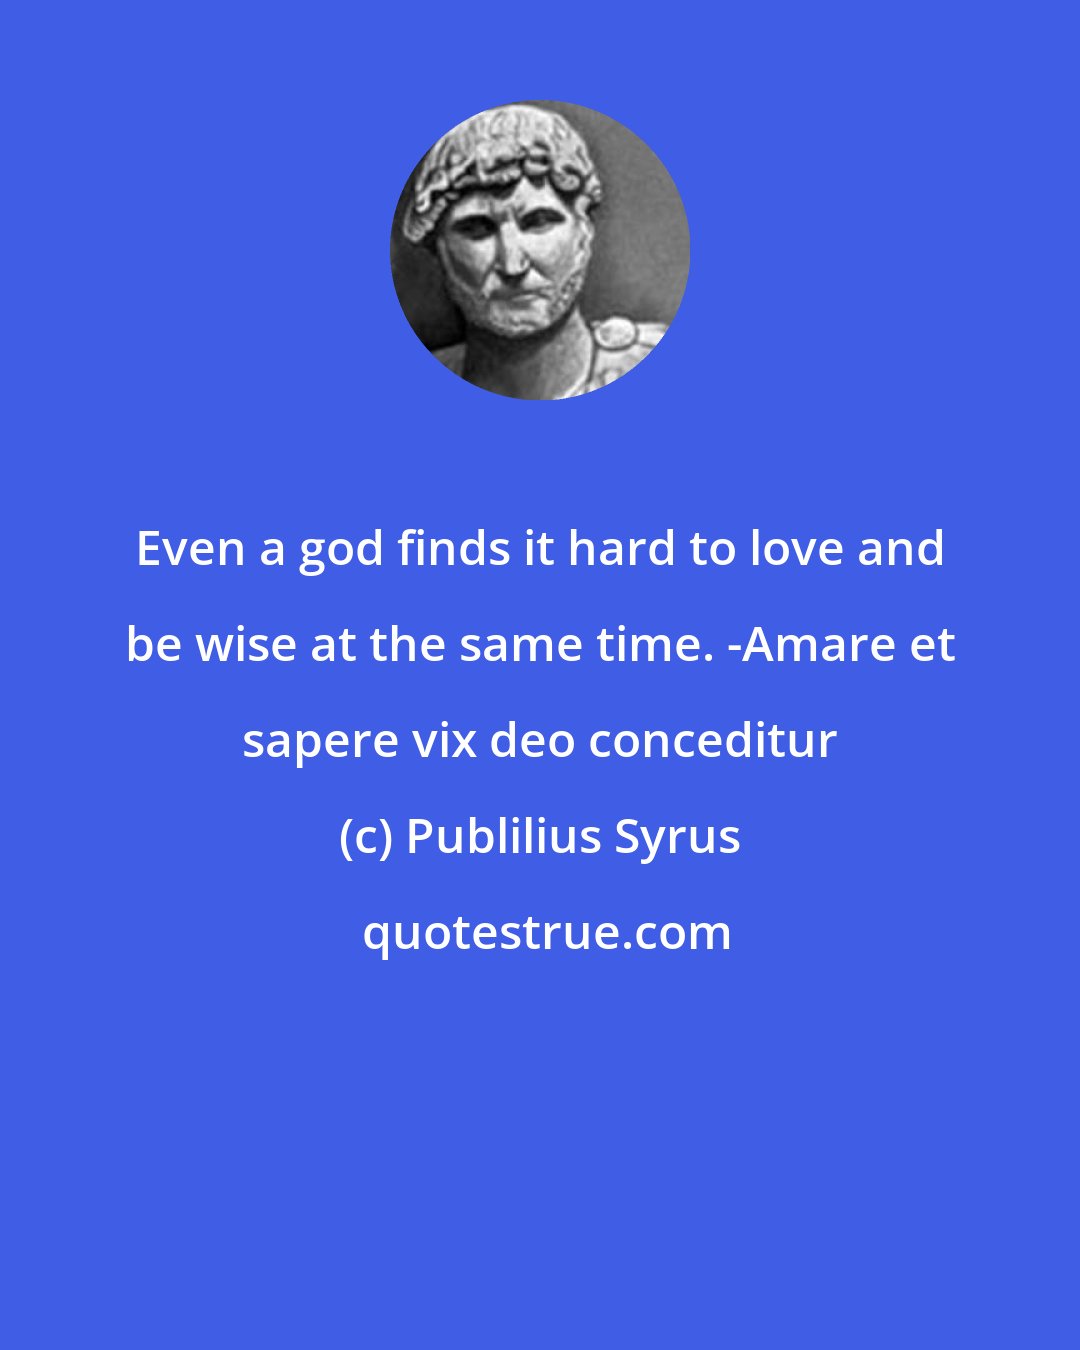 Publilius Syrus: Even a god finds it hard to love and be wise at the same time. -Amare et sapere vix deo conceditur